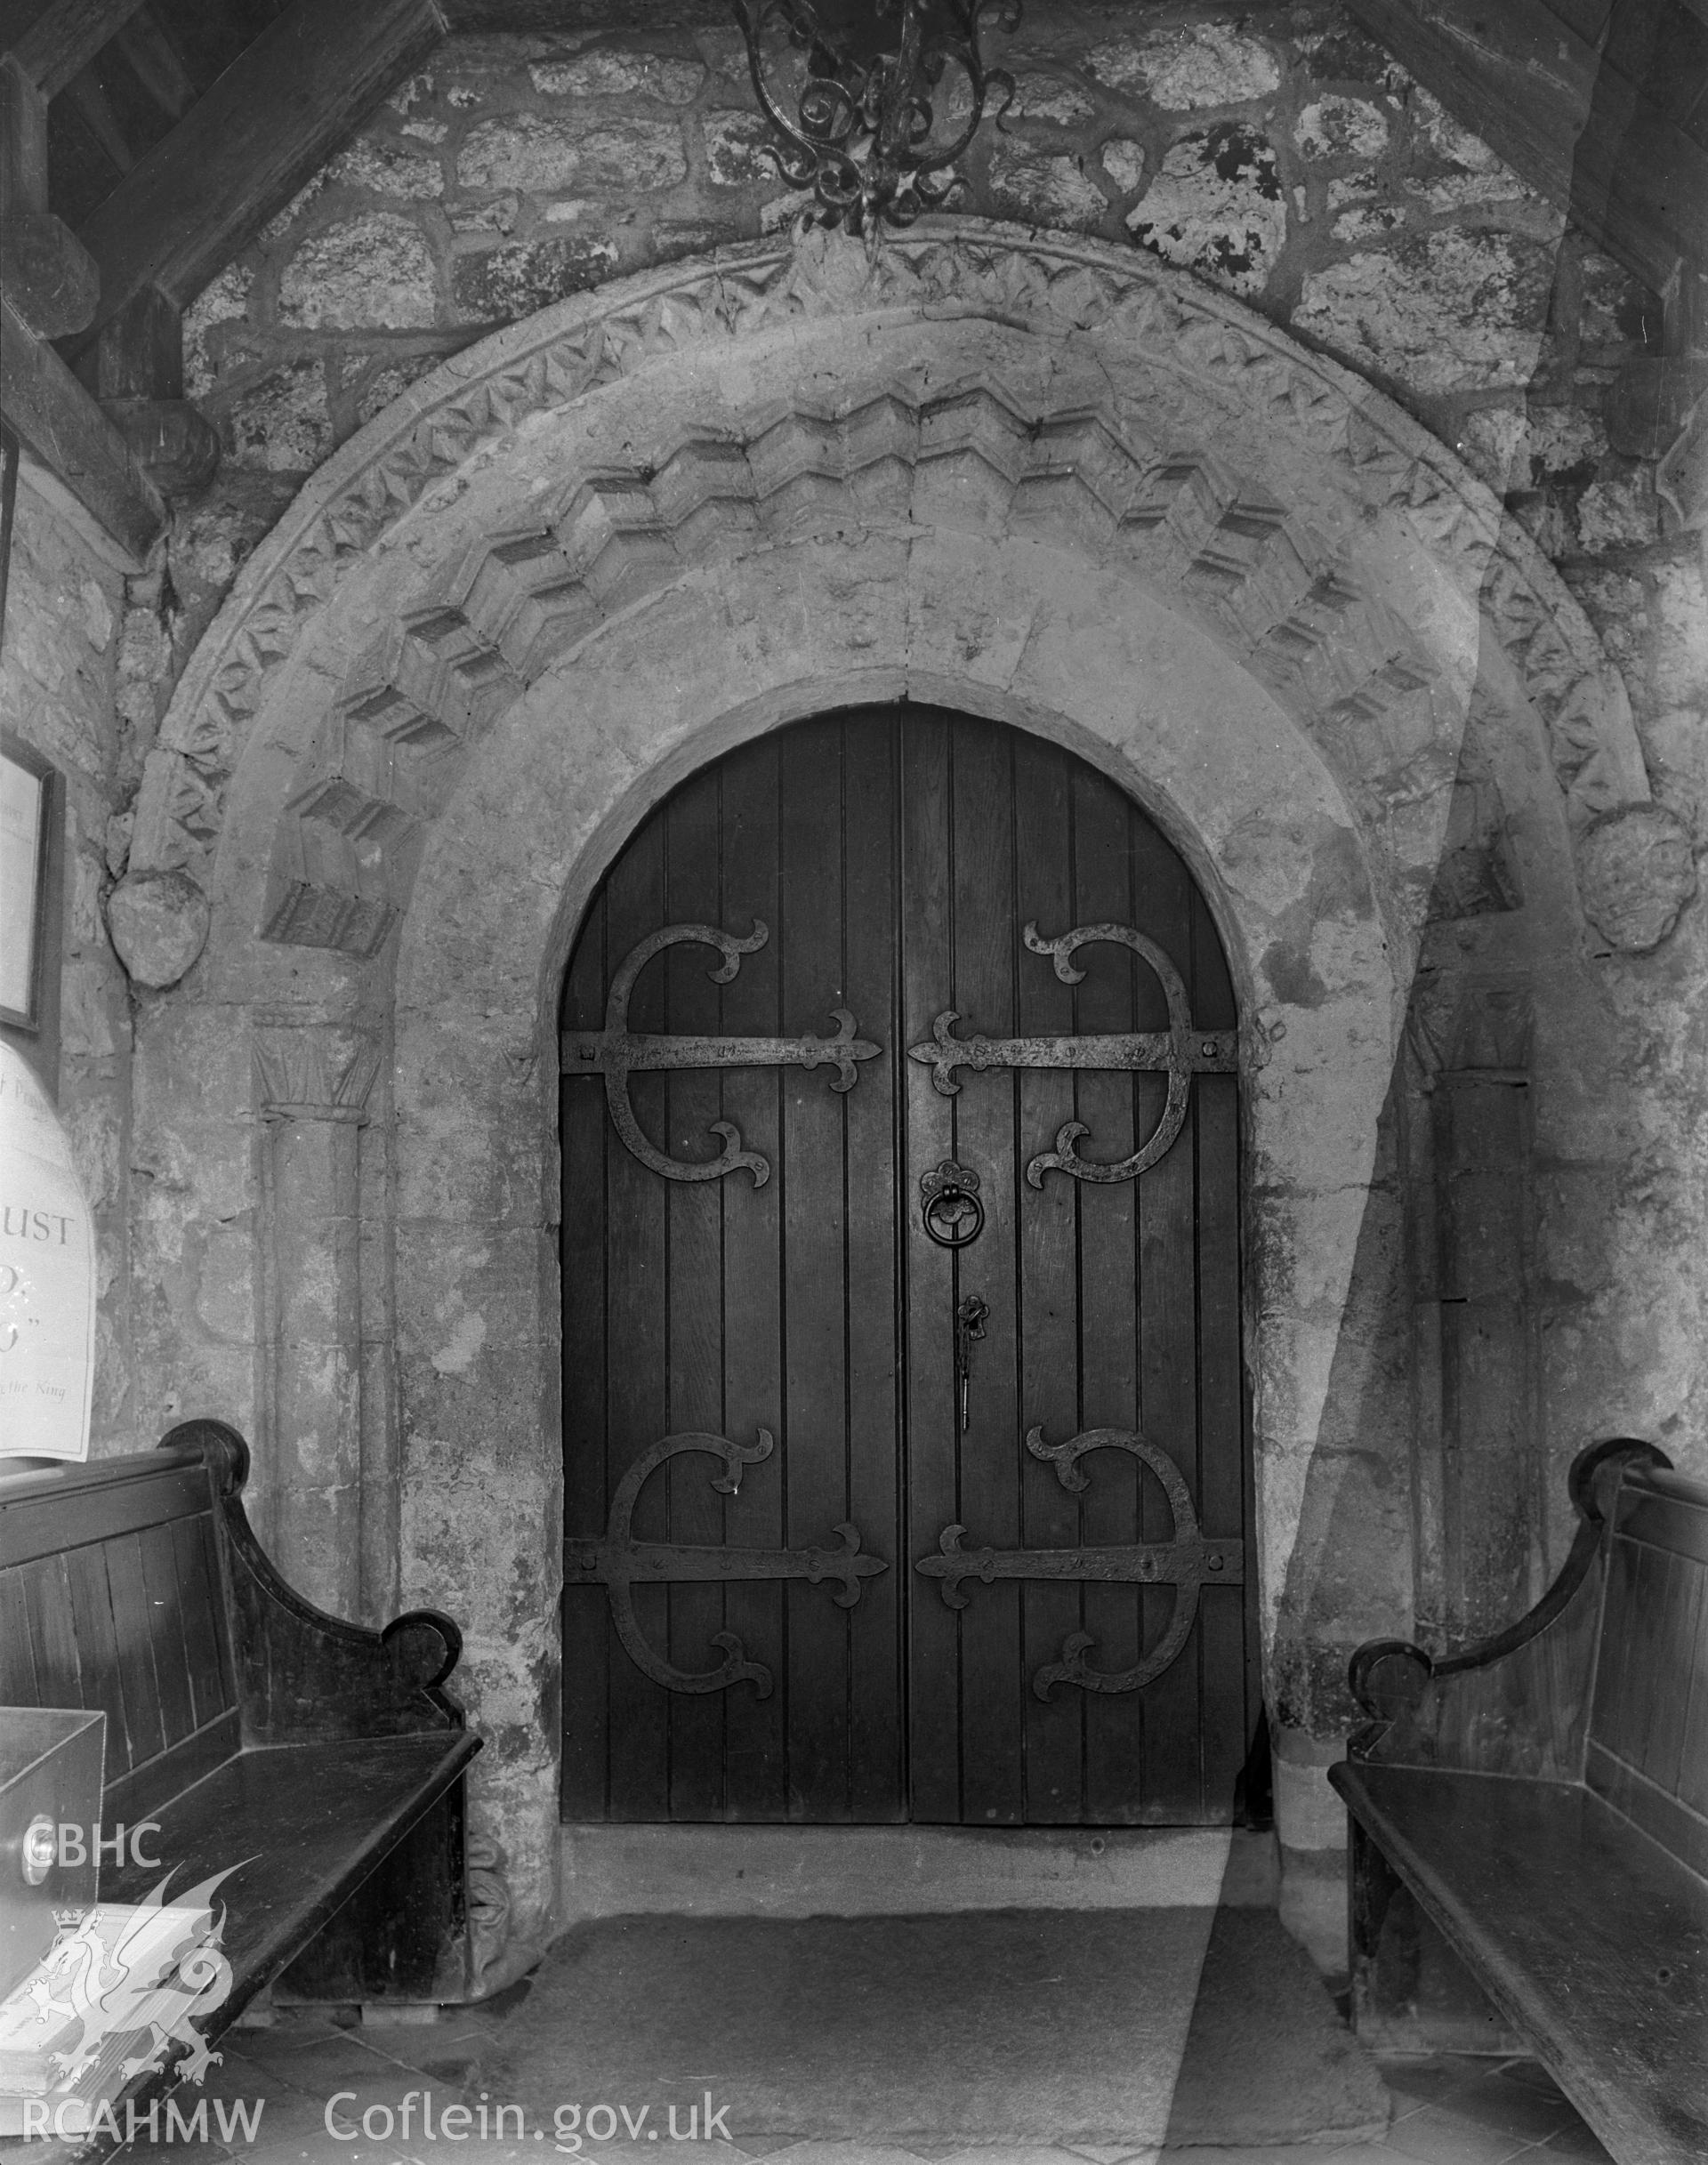 Exterior view showing the south doorway of St Mary's Church, Rhossili Gower, taken 19.06.1940.